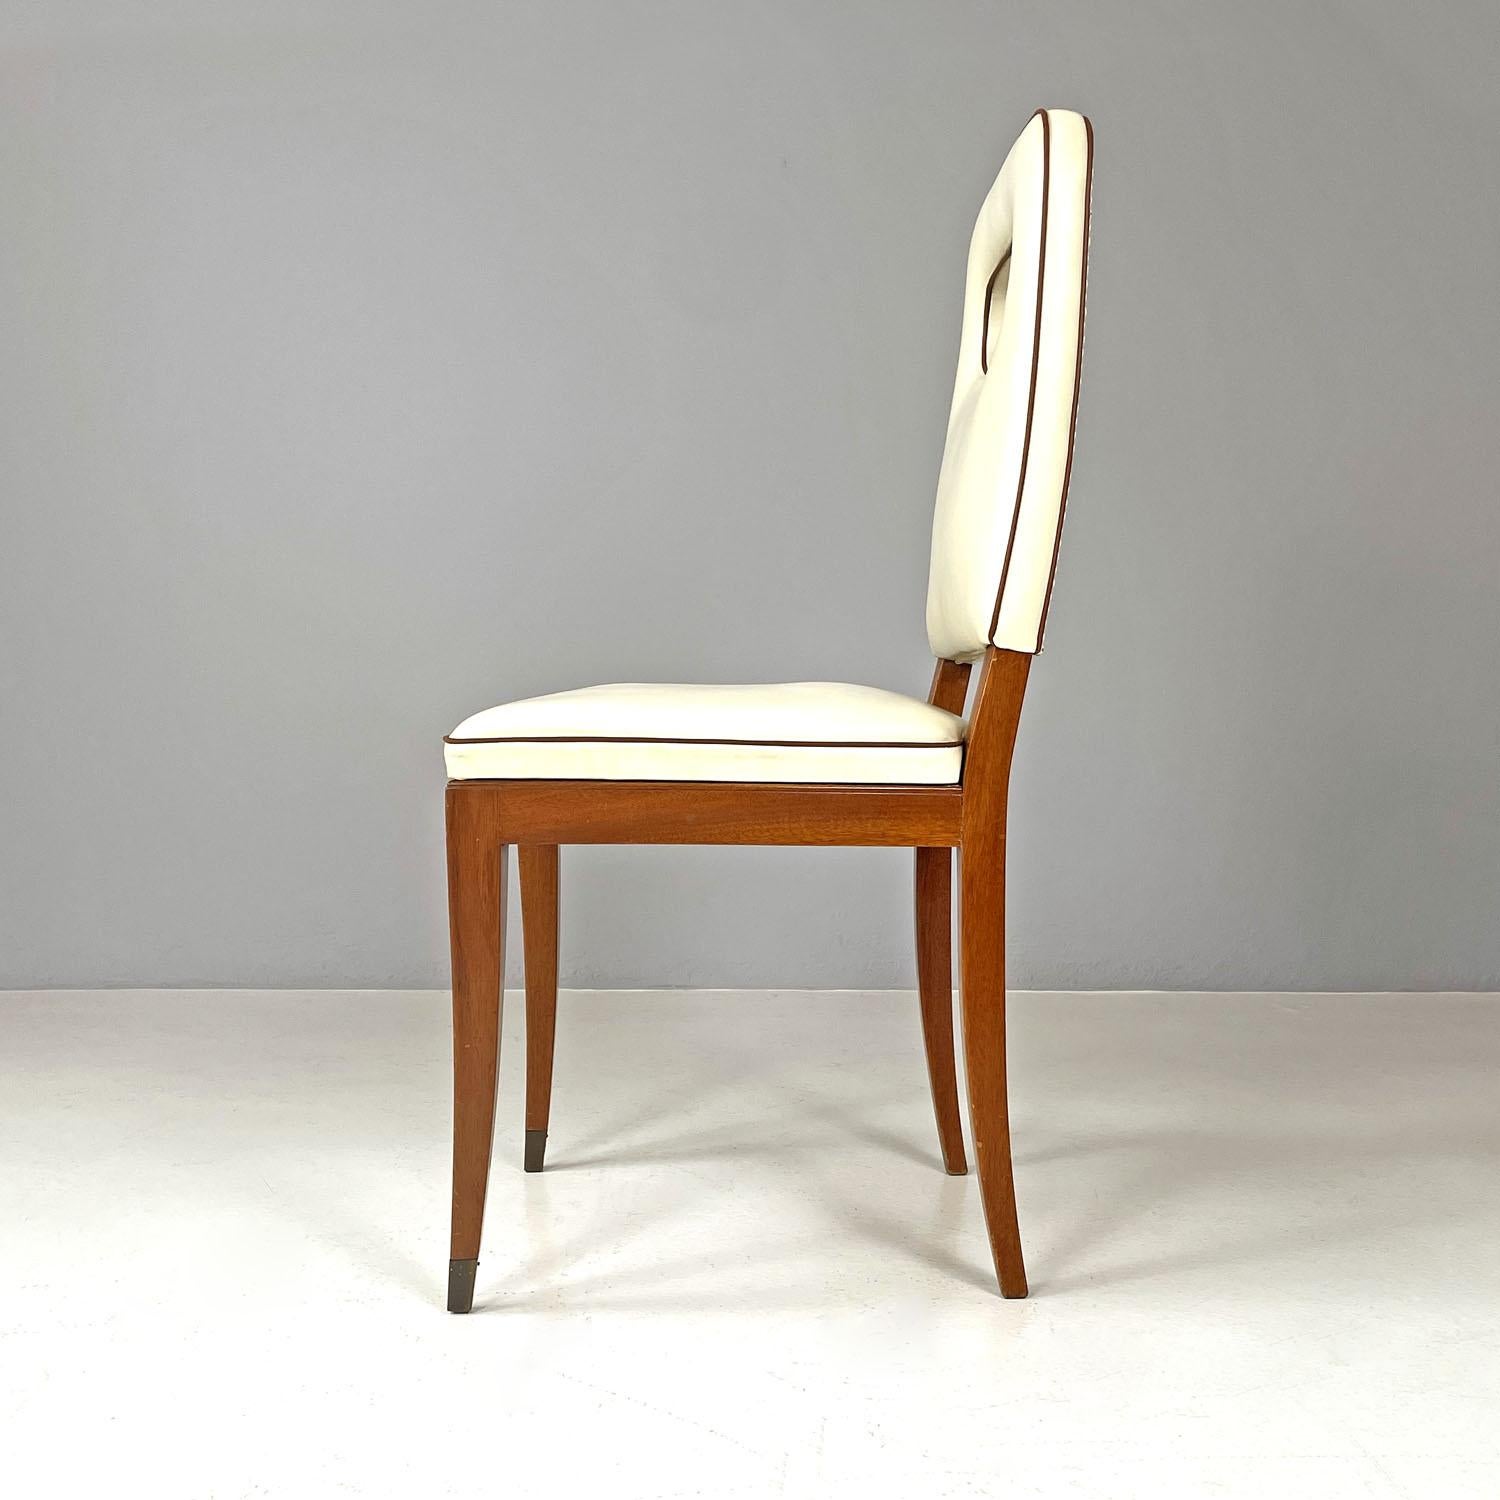 Mid-20th Century Italian Art Deco white leather and wood chair by Giovanni Gariboldi, 1940s For Sale